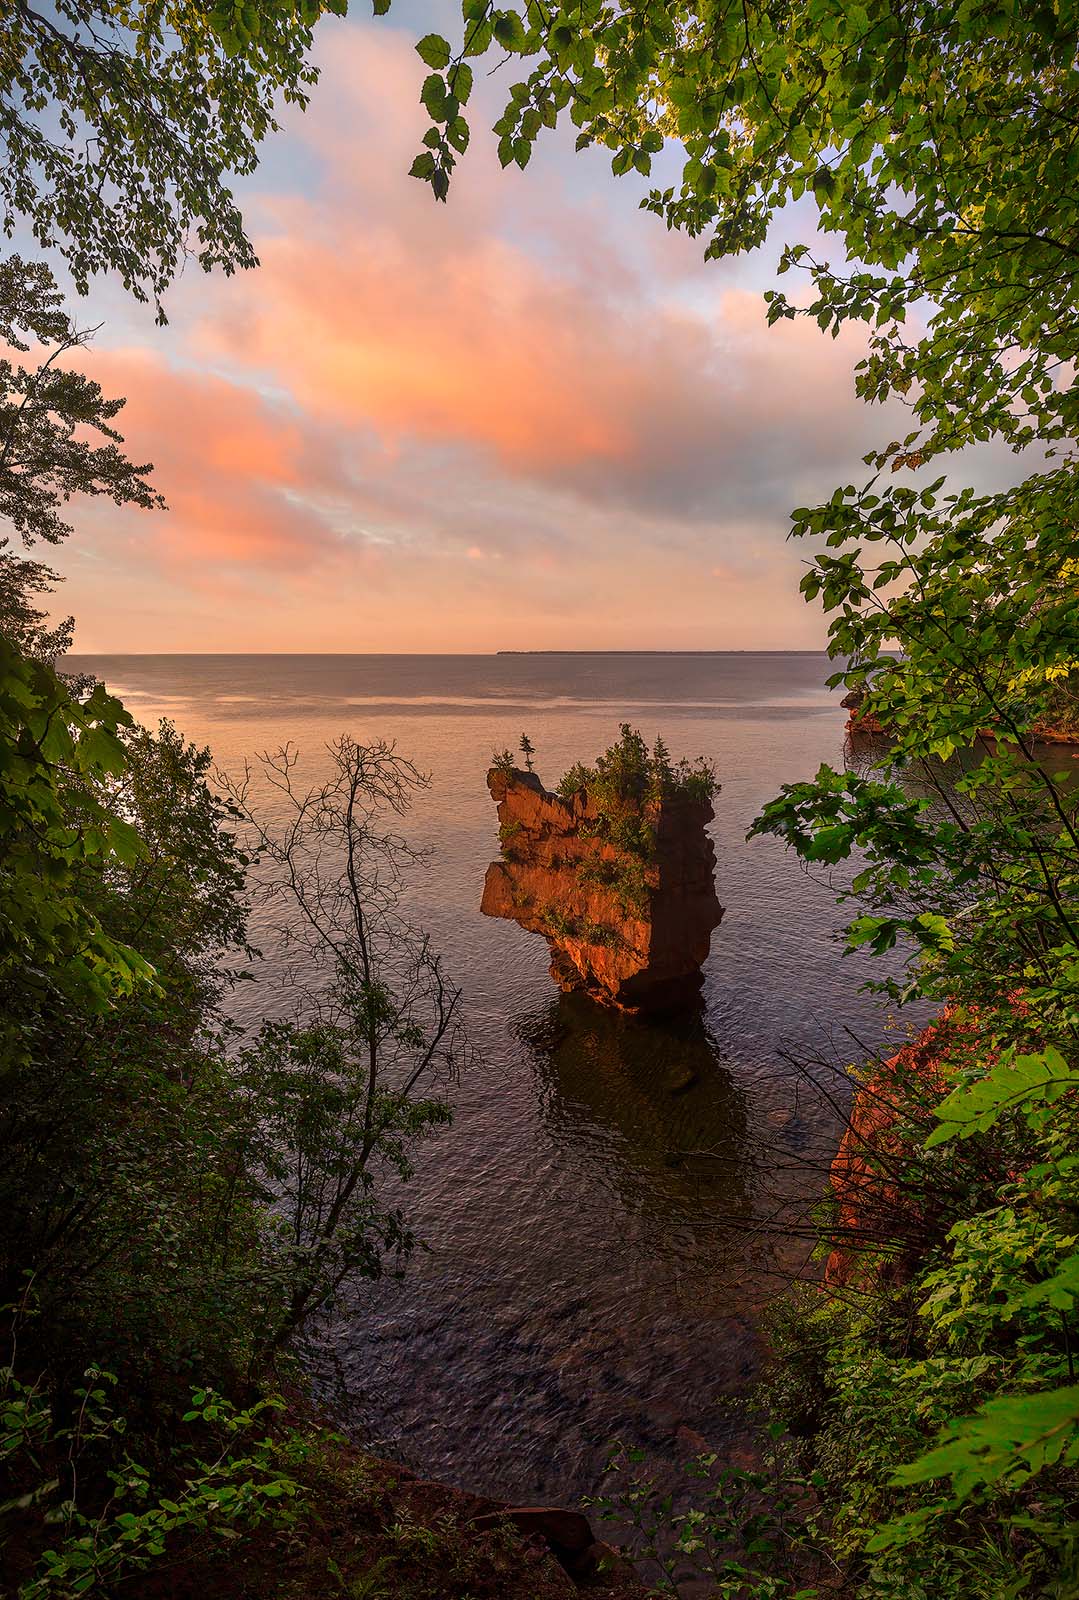 sunrise from above the sandstone cliffs on stockton island in the apostle islands national lakeshore on lake superior wisconsin